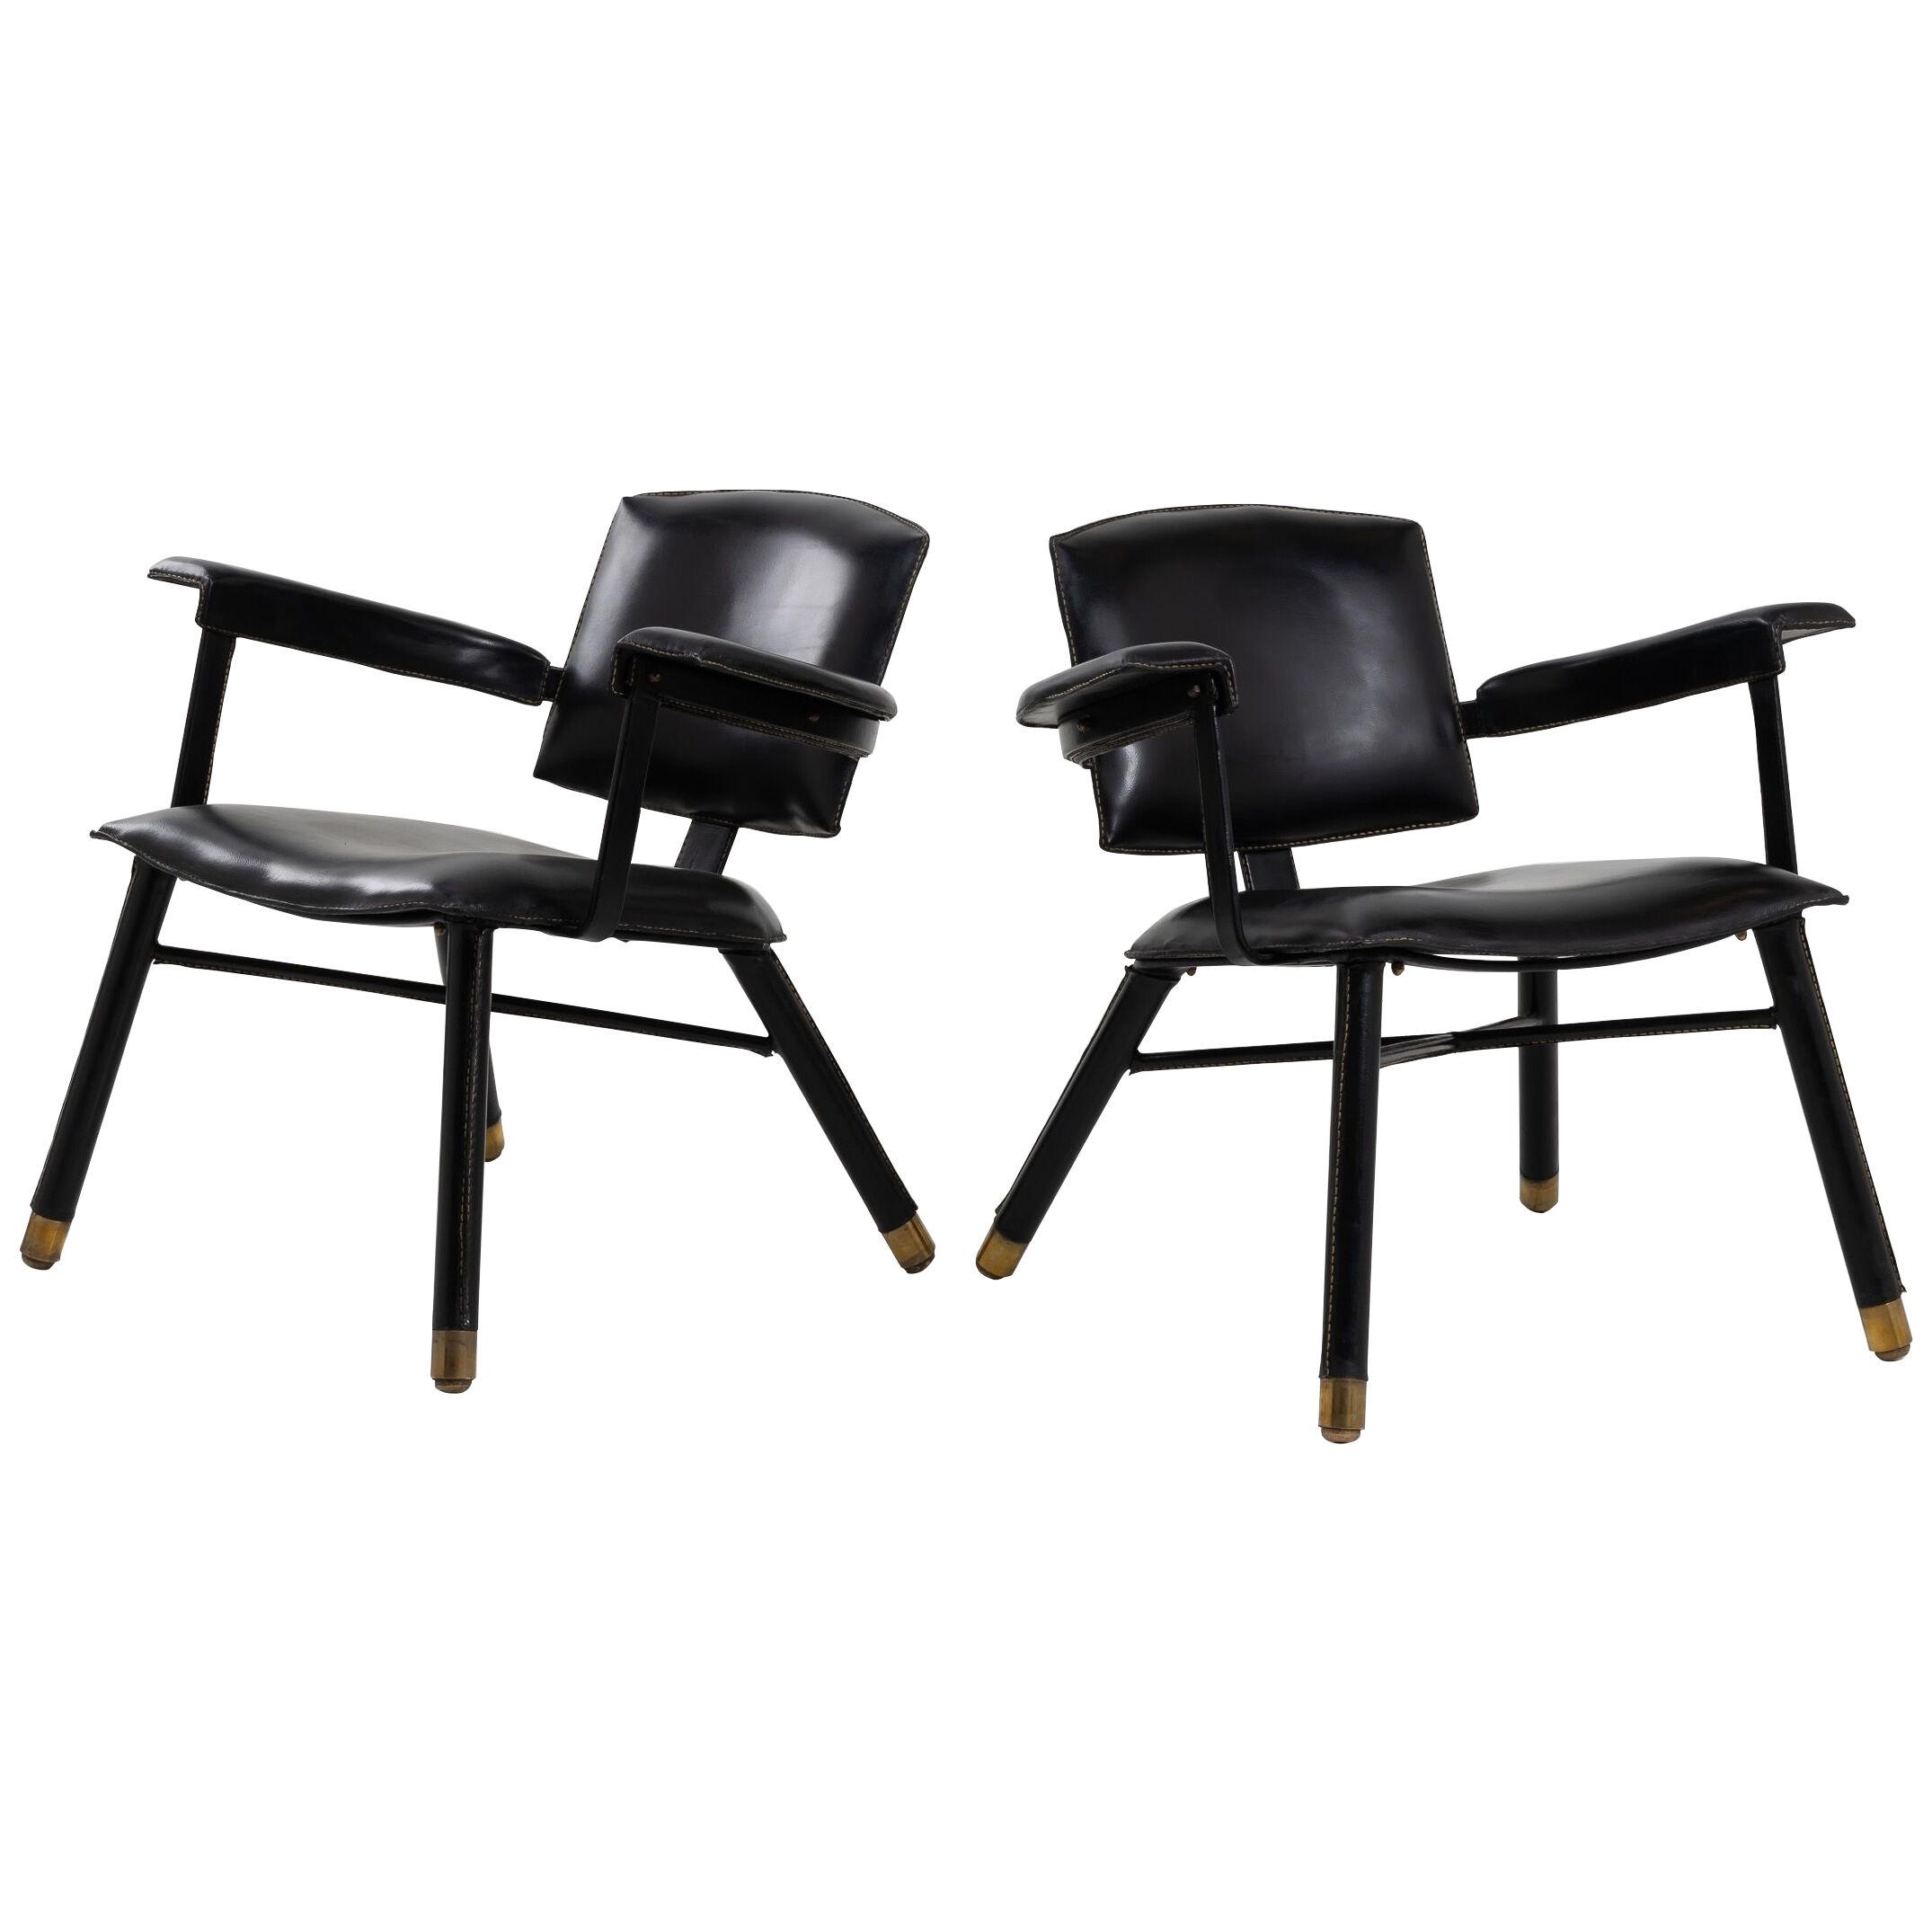 Pair of black leather armchairs called “chauffeuse” by Jacques Adnet